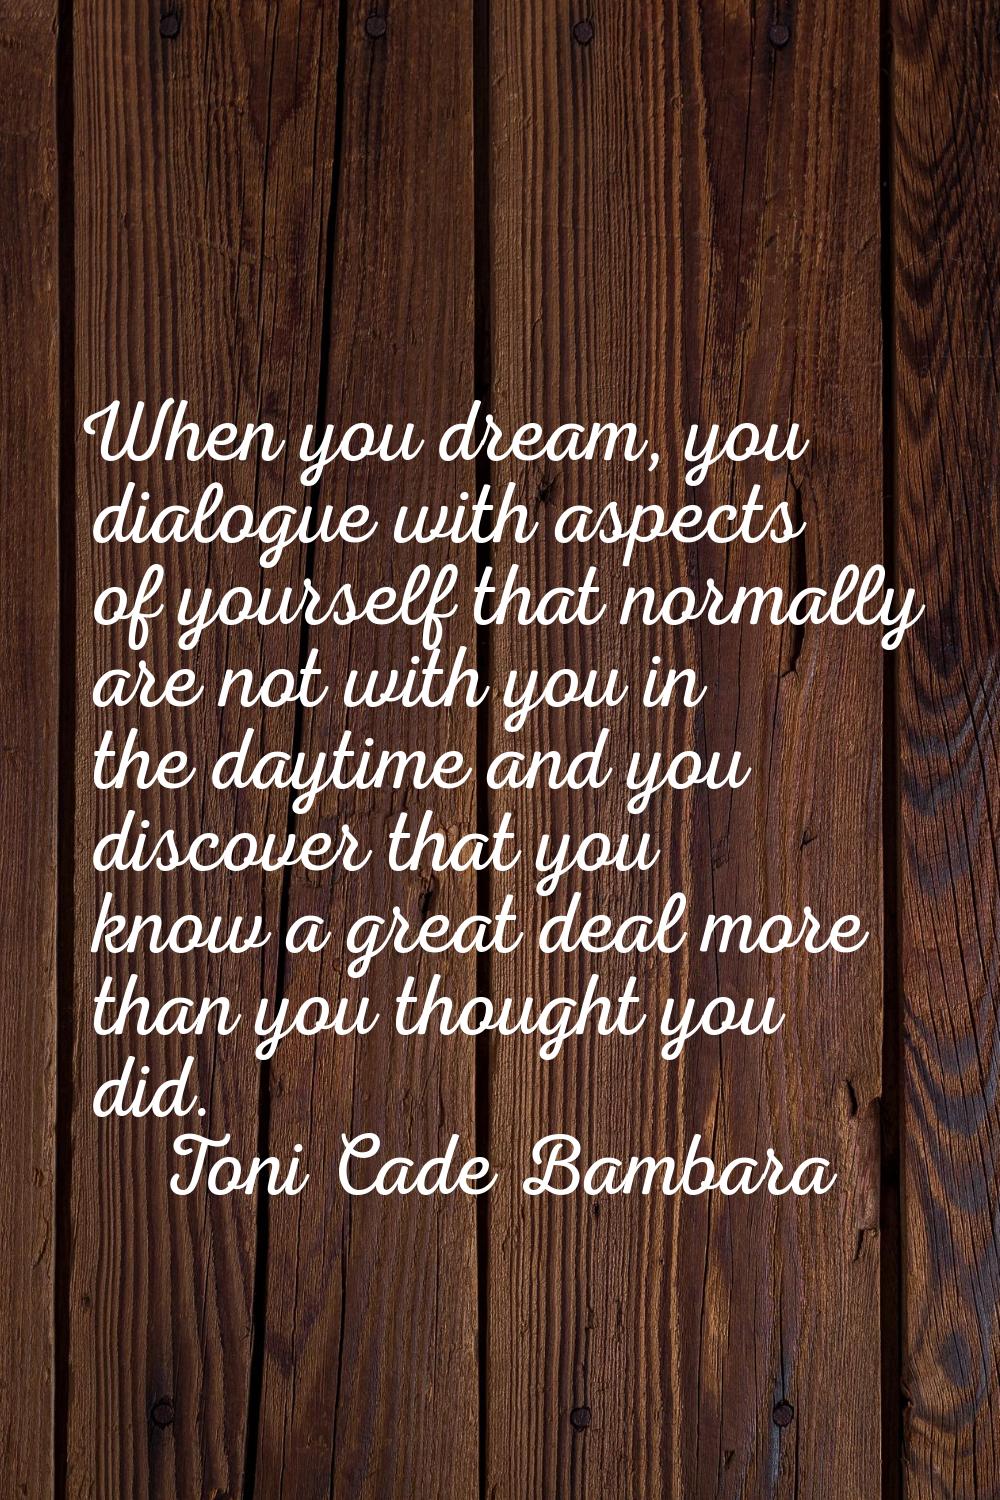 When you dream, you dialogue with aspects of yourself that normally are not with you in the daytime